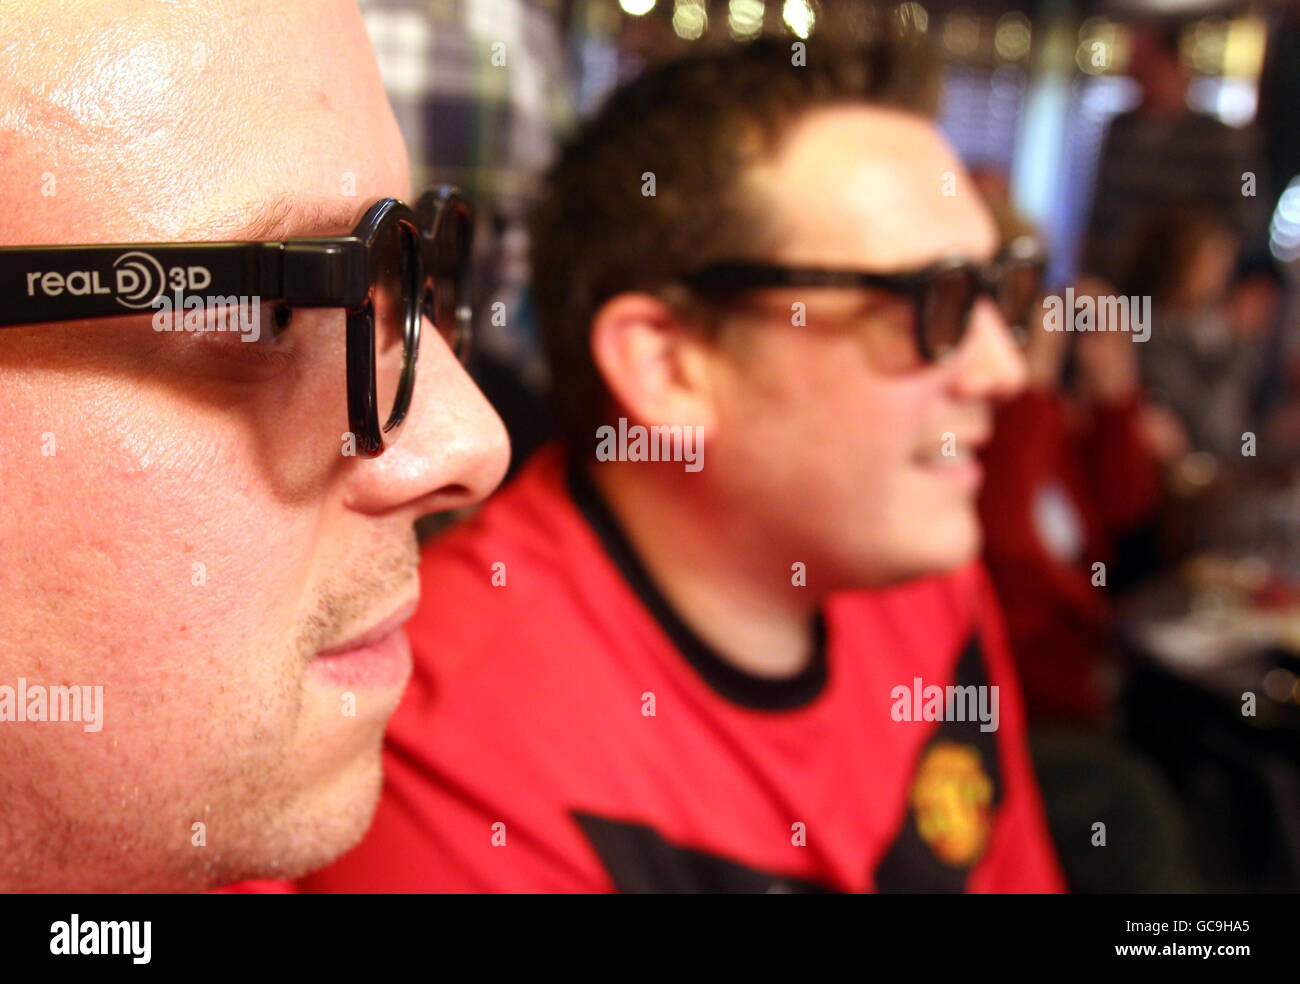 Manchester United fans watch their team in the world's first live 3D TV sports broadcast football match against Arsenal in the Red Lion pub in Withington, Manchester. Stock Photo